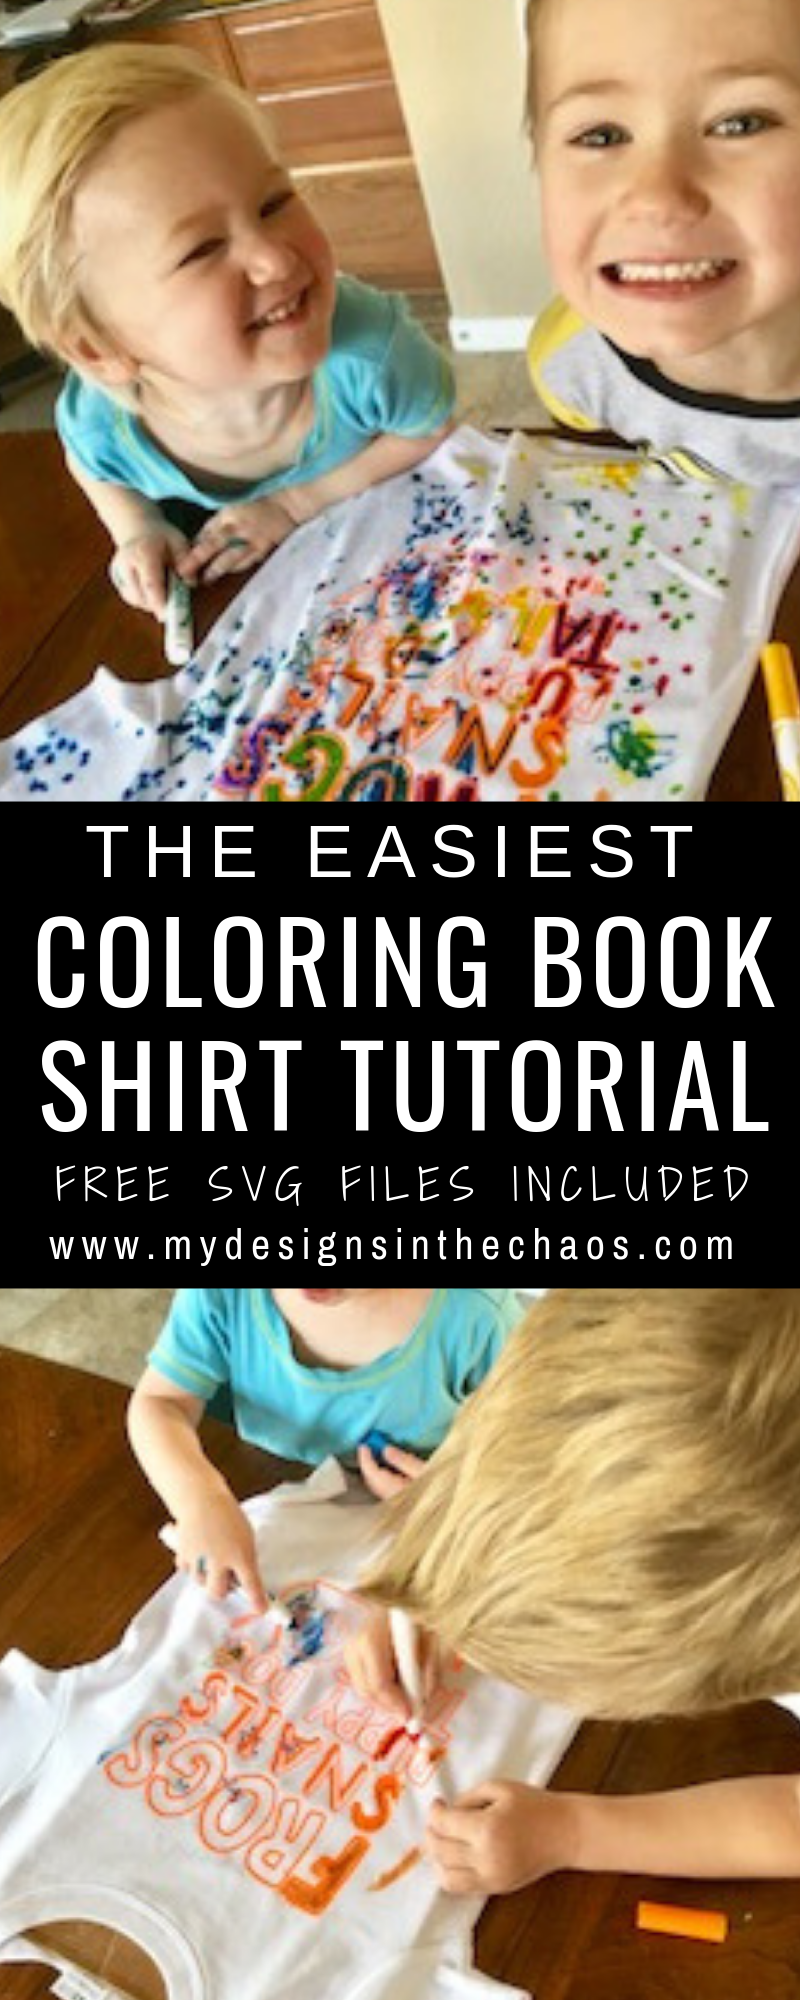 DIY Coloring Book Shirt Tutorial - My Designs In the Chaos